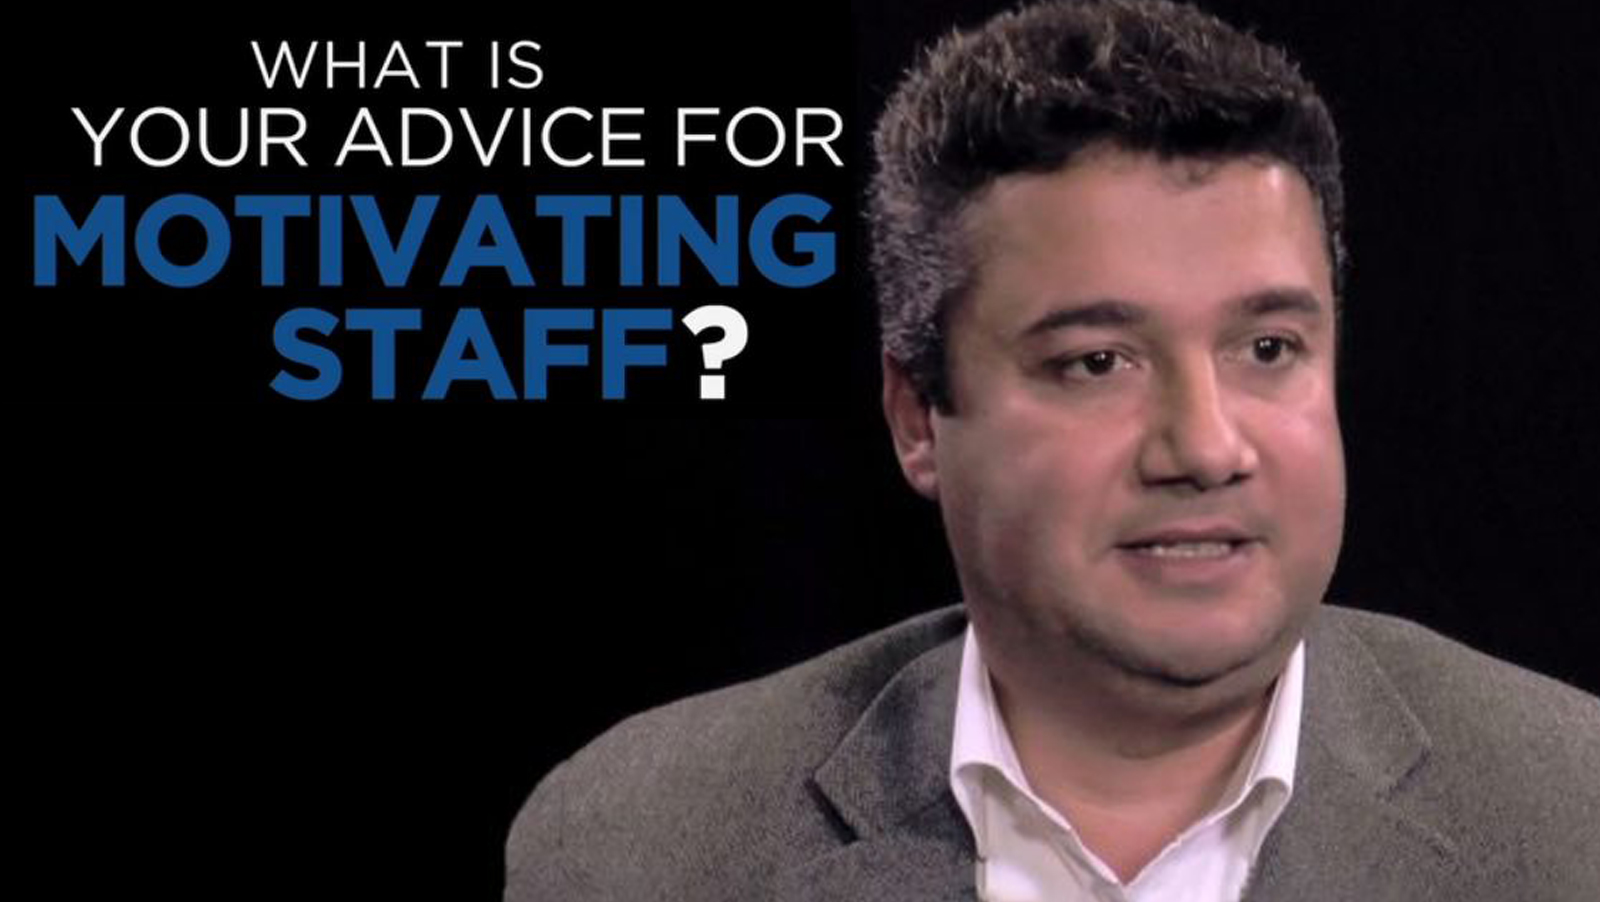 Hussein Chahine: Shared Experience - What is your advice for motivating staff?